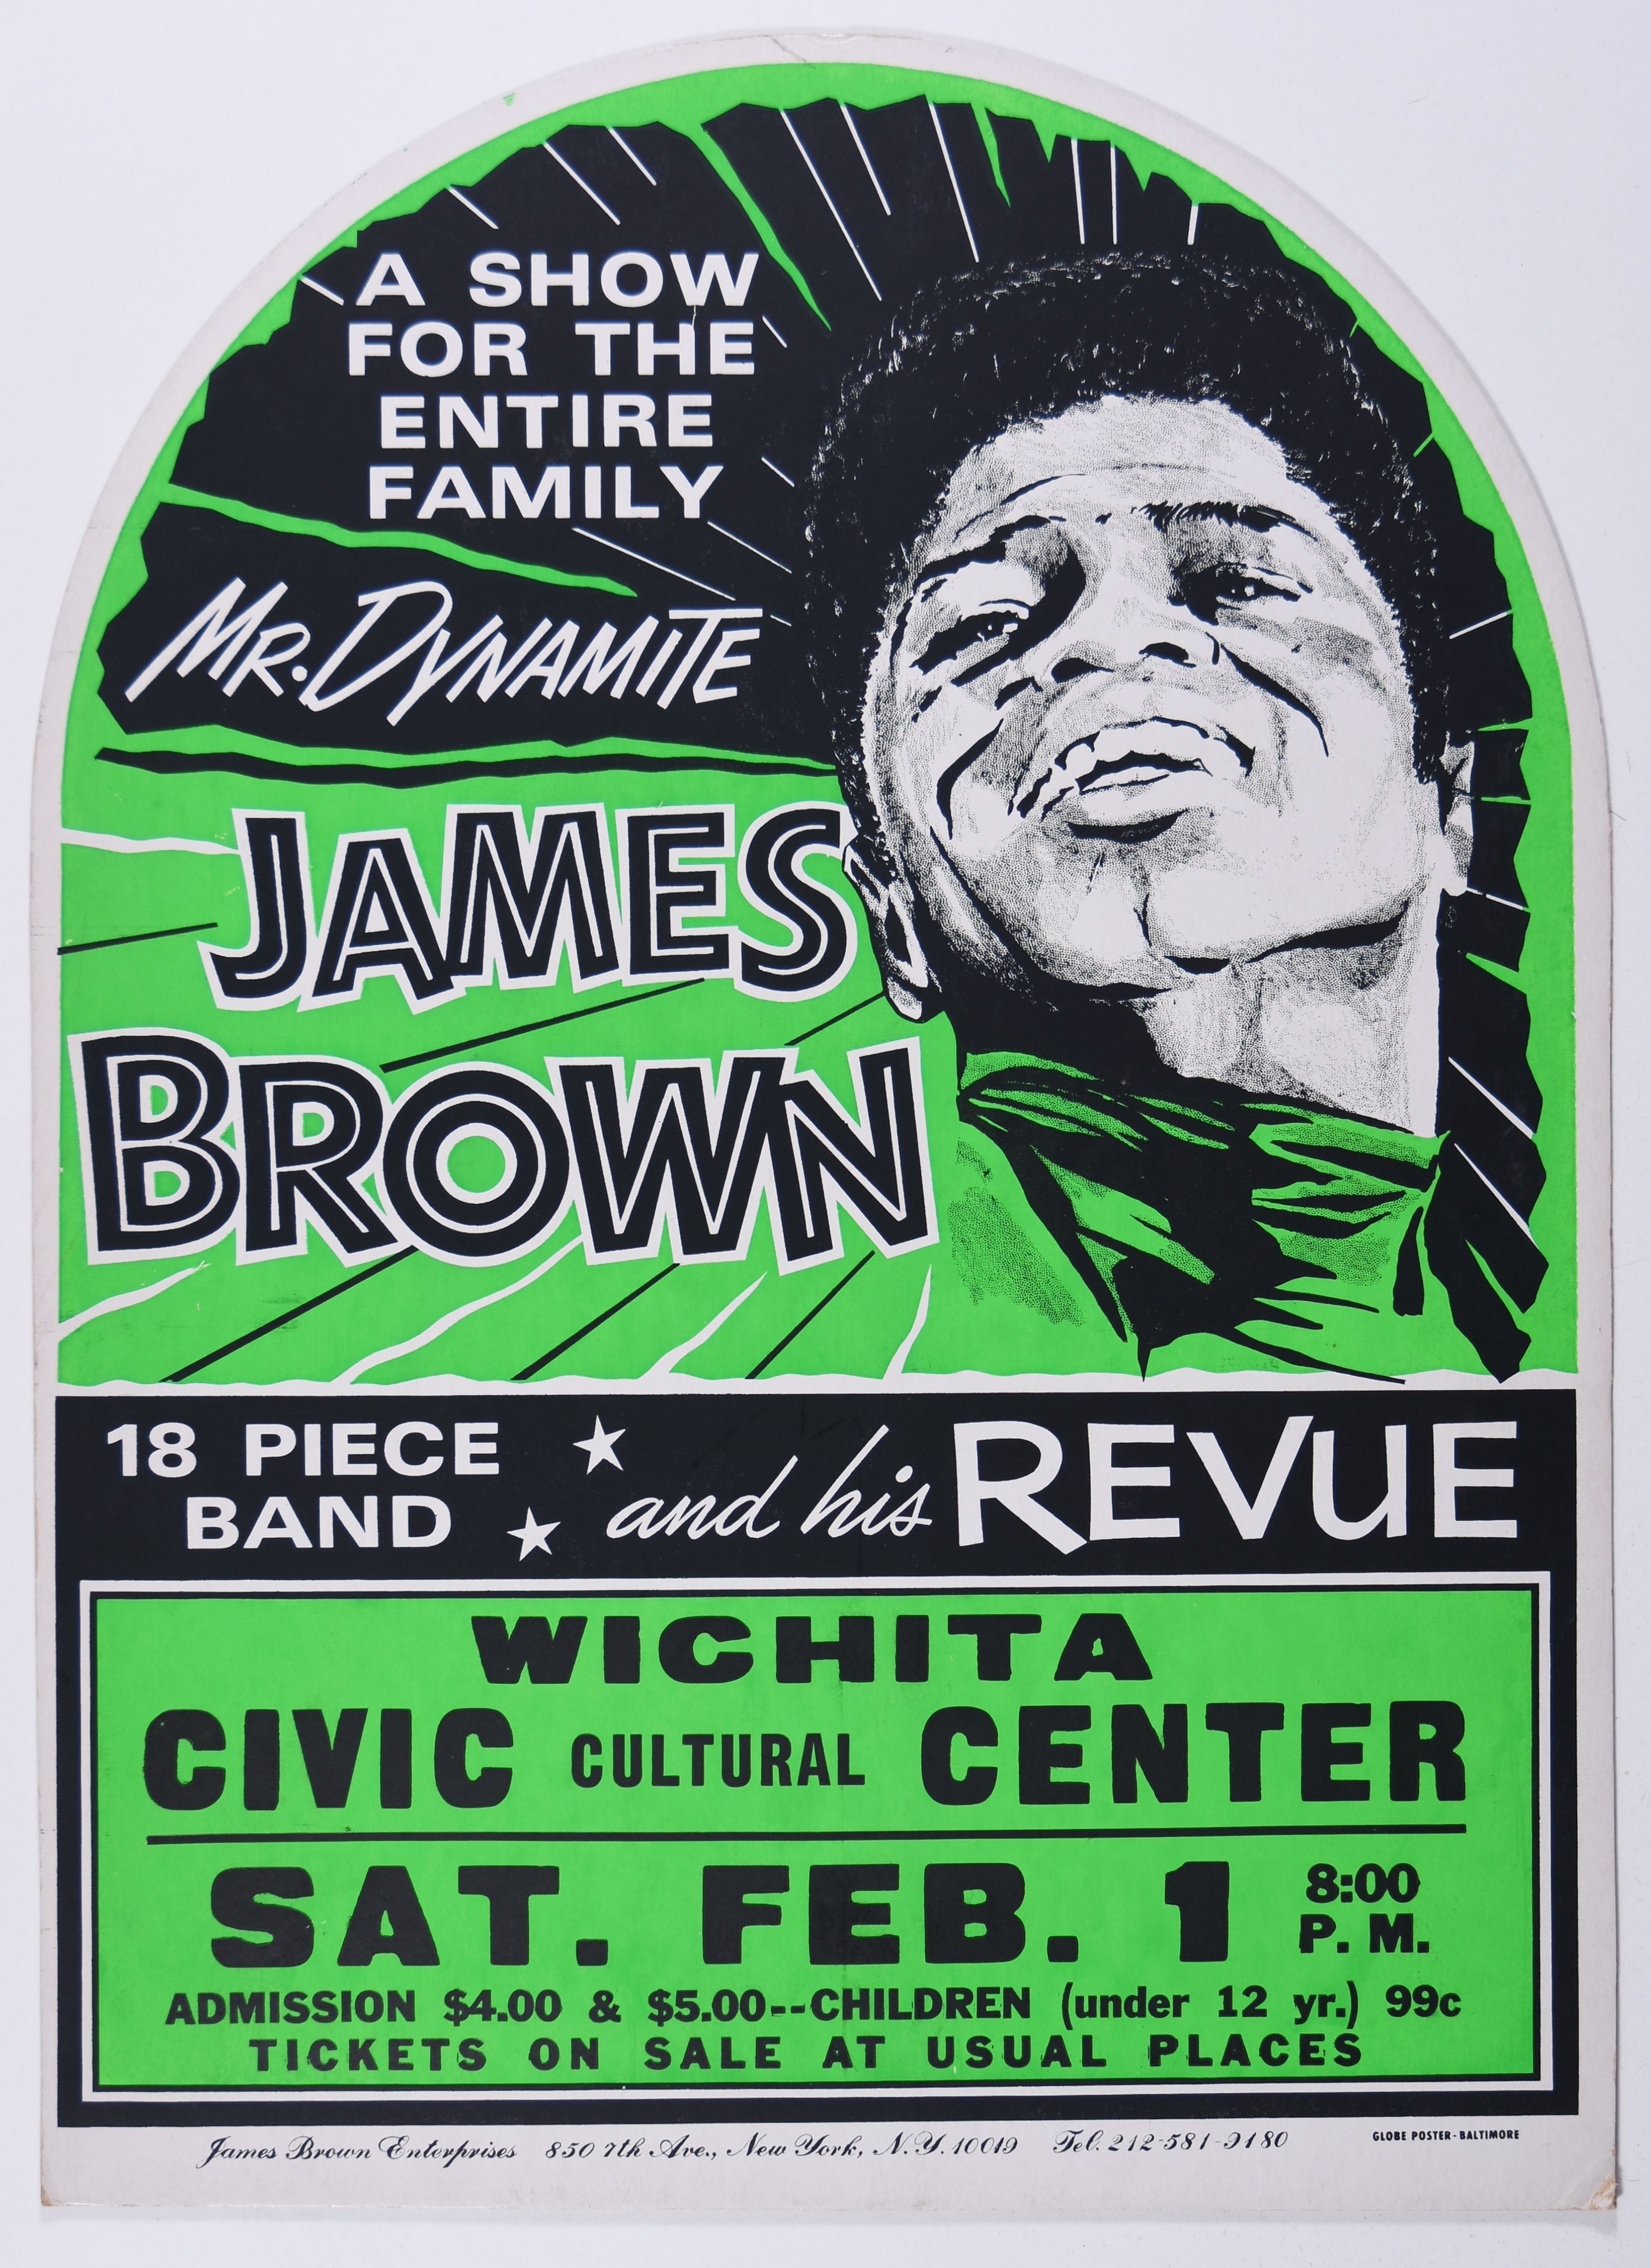 James Brown at Wichita Civic Cultural Center 1975 Concert Poster